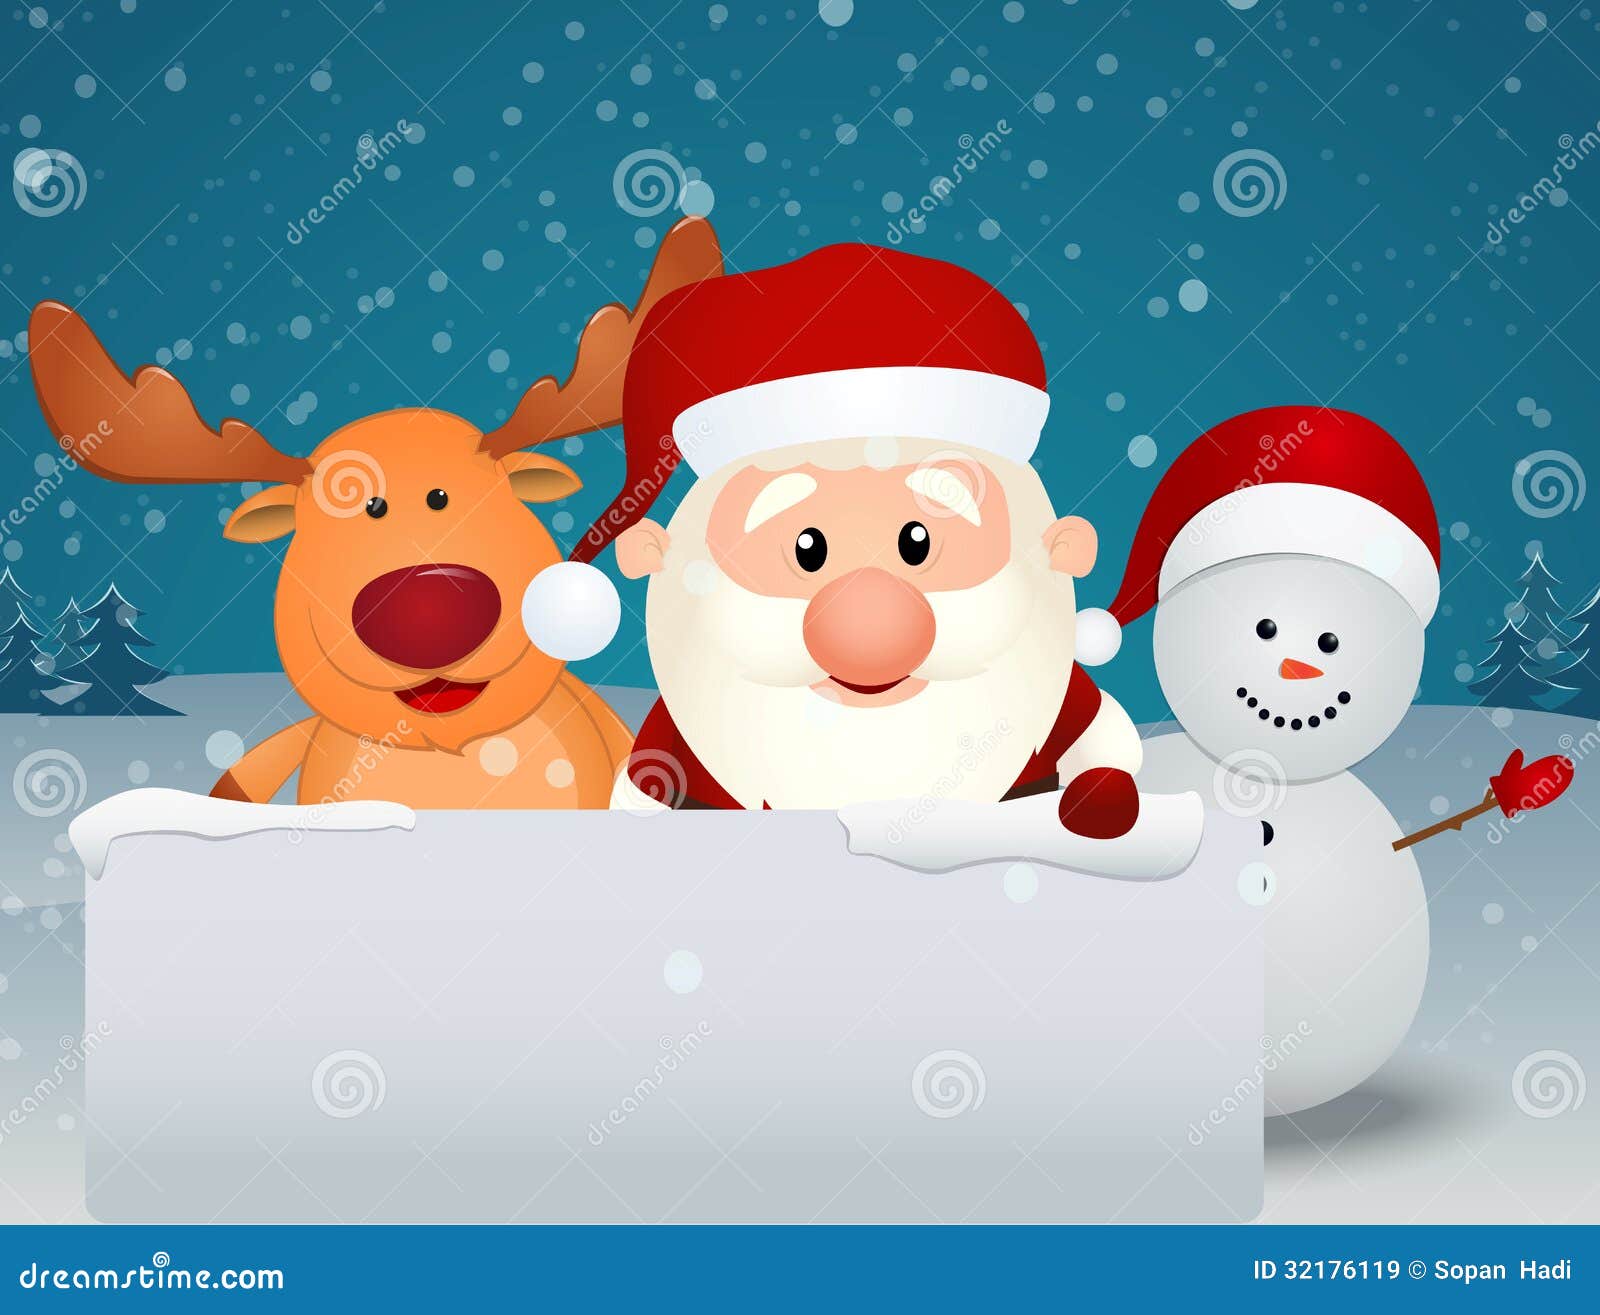 Santa Claus With Reindeer And Snowman With Blank Sign 